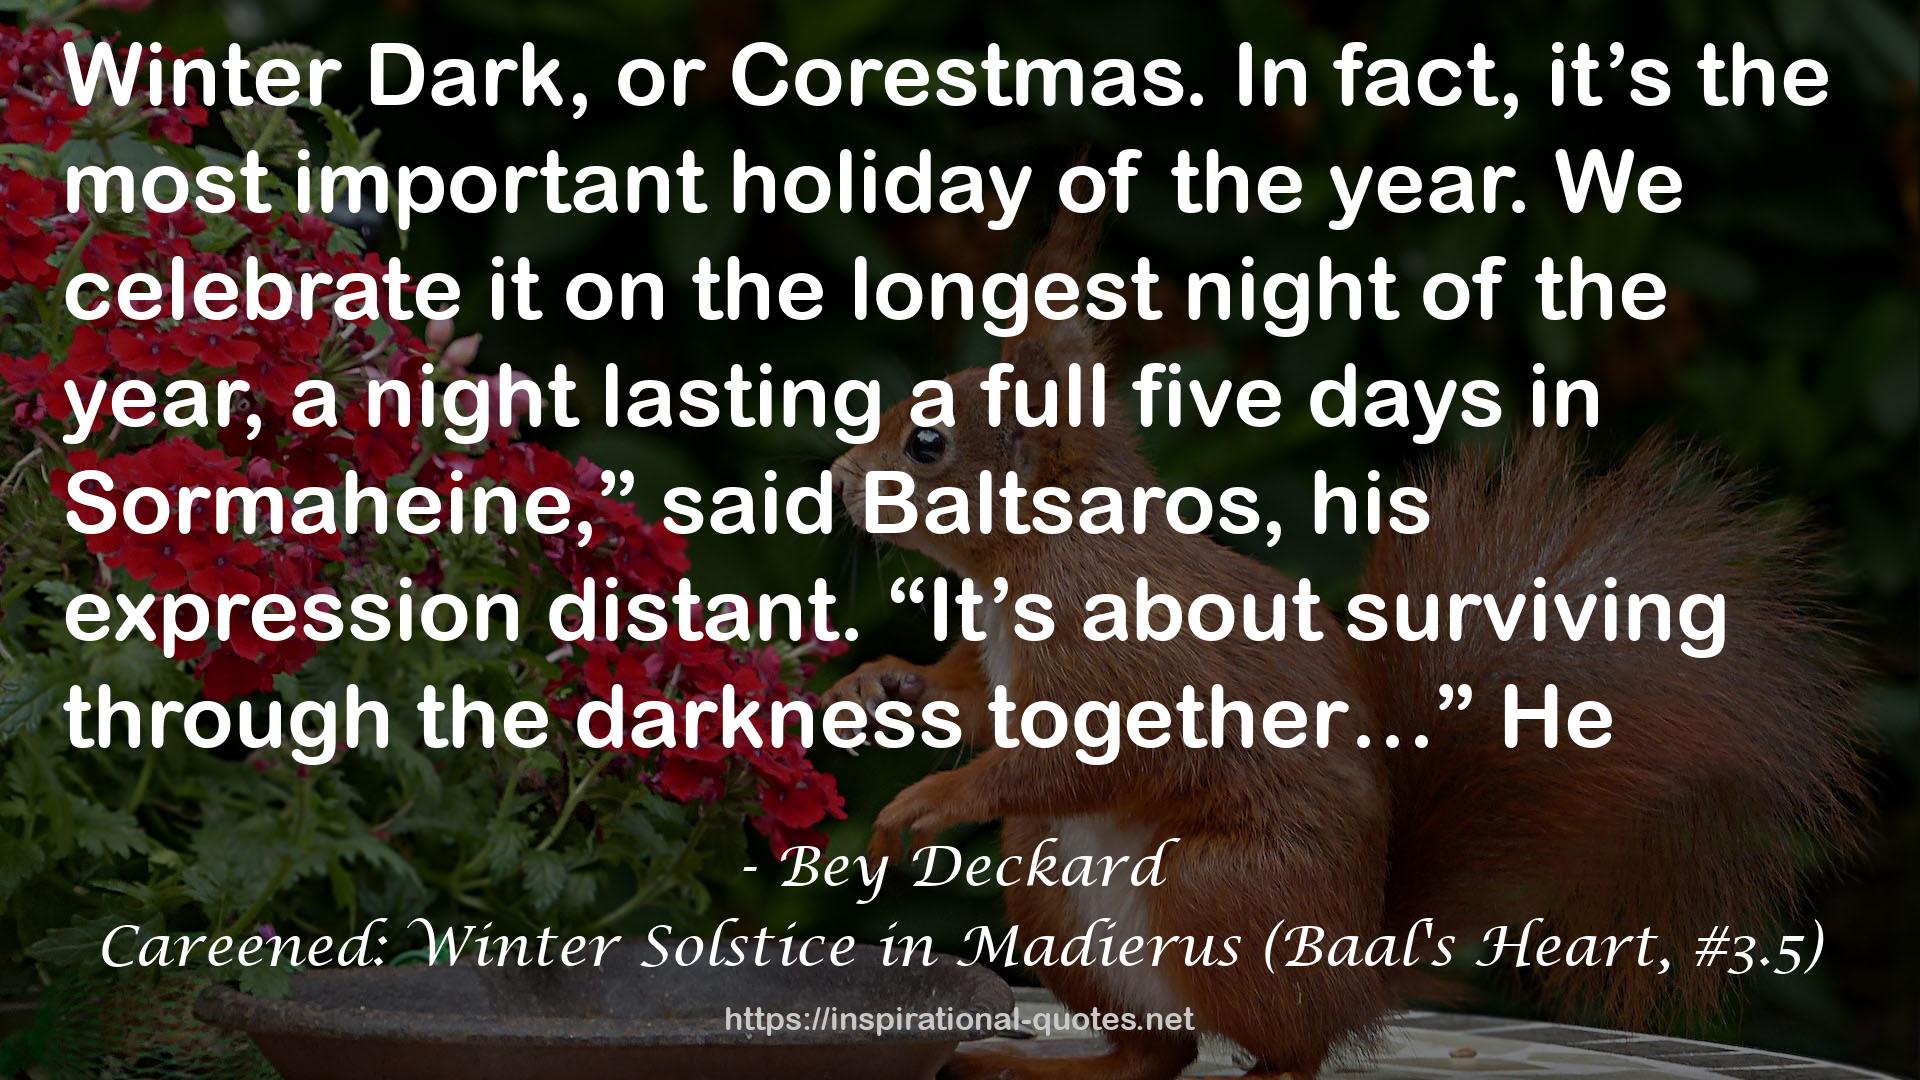 Careened: Winter Solstice in Madierus (Baal's Heart, #3.5) QUOTES